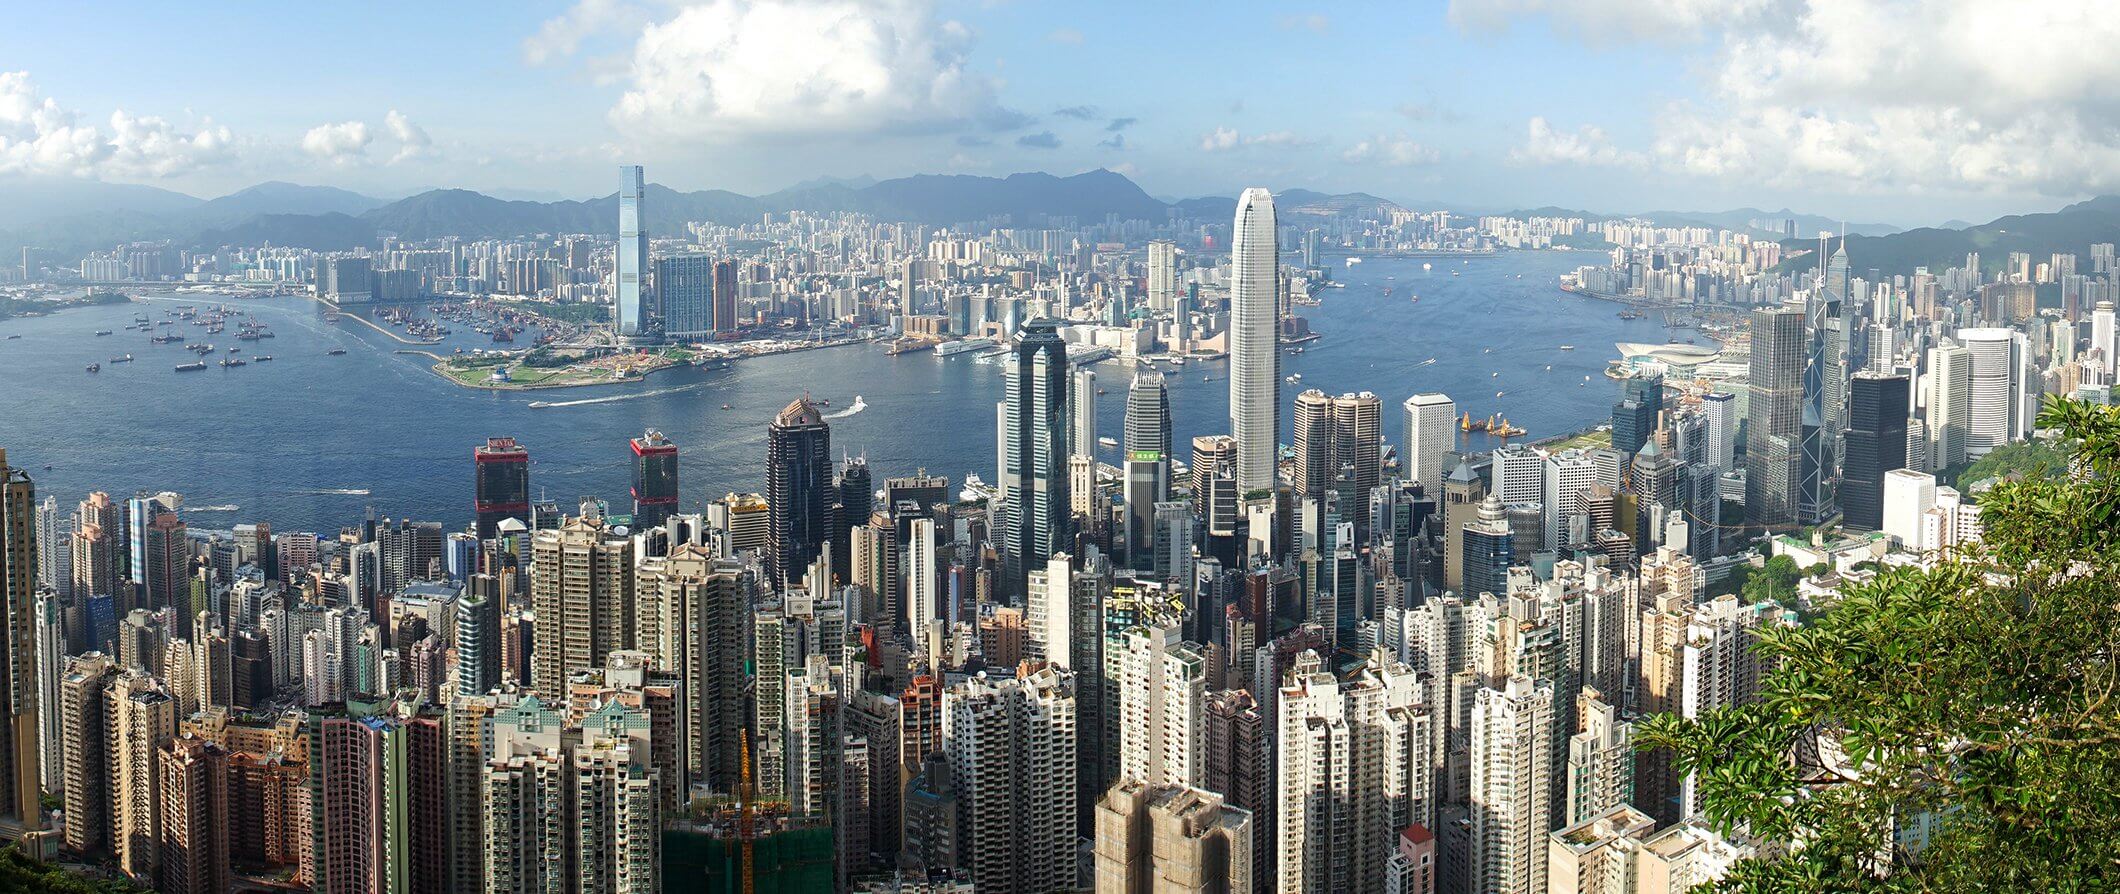 View of Hong kong taken from above